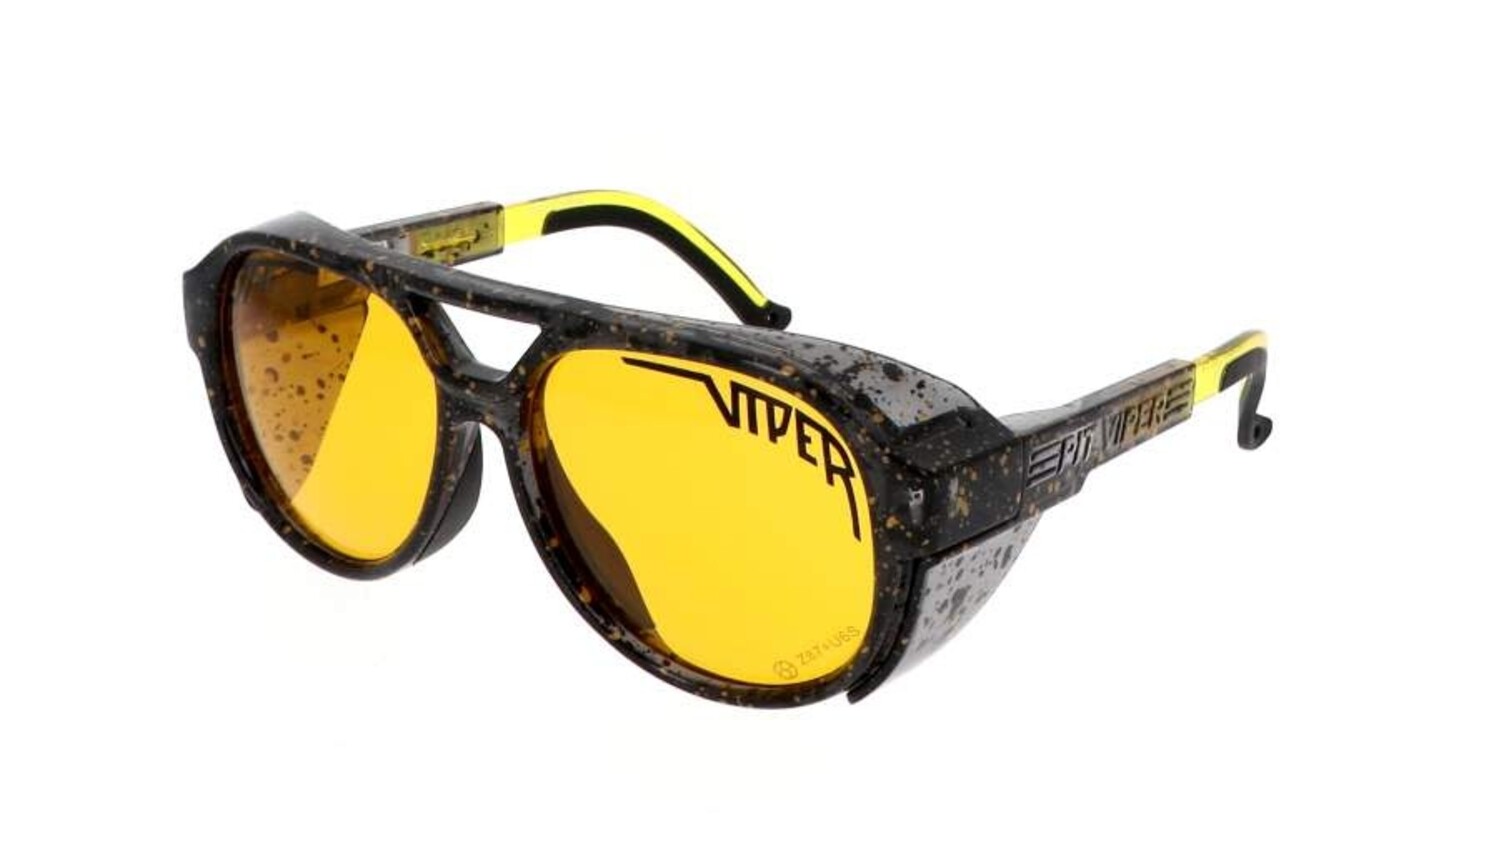 PIT VIPER PIT VIPER EXCITERS THE CROSSFIRE SUNGLASSES - The Garden